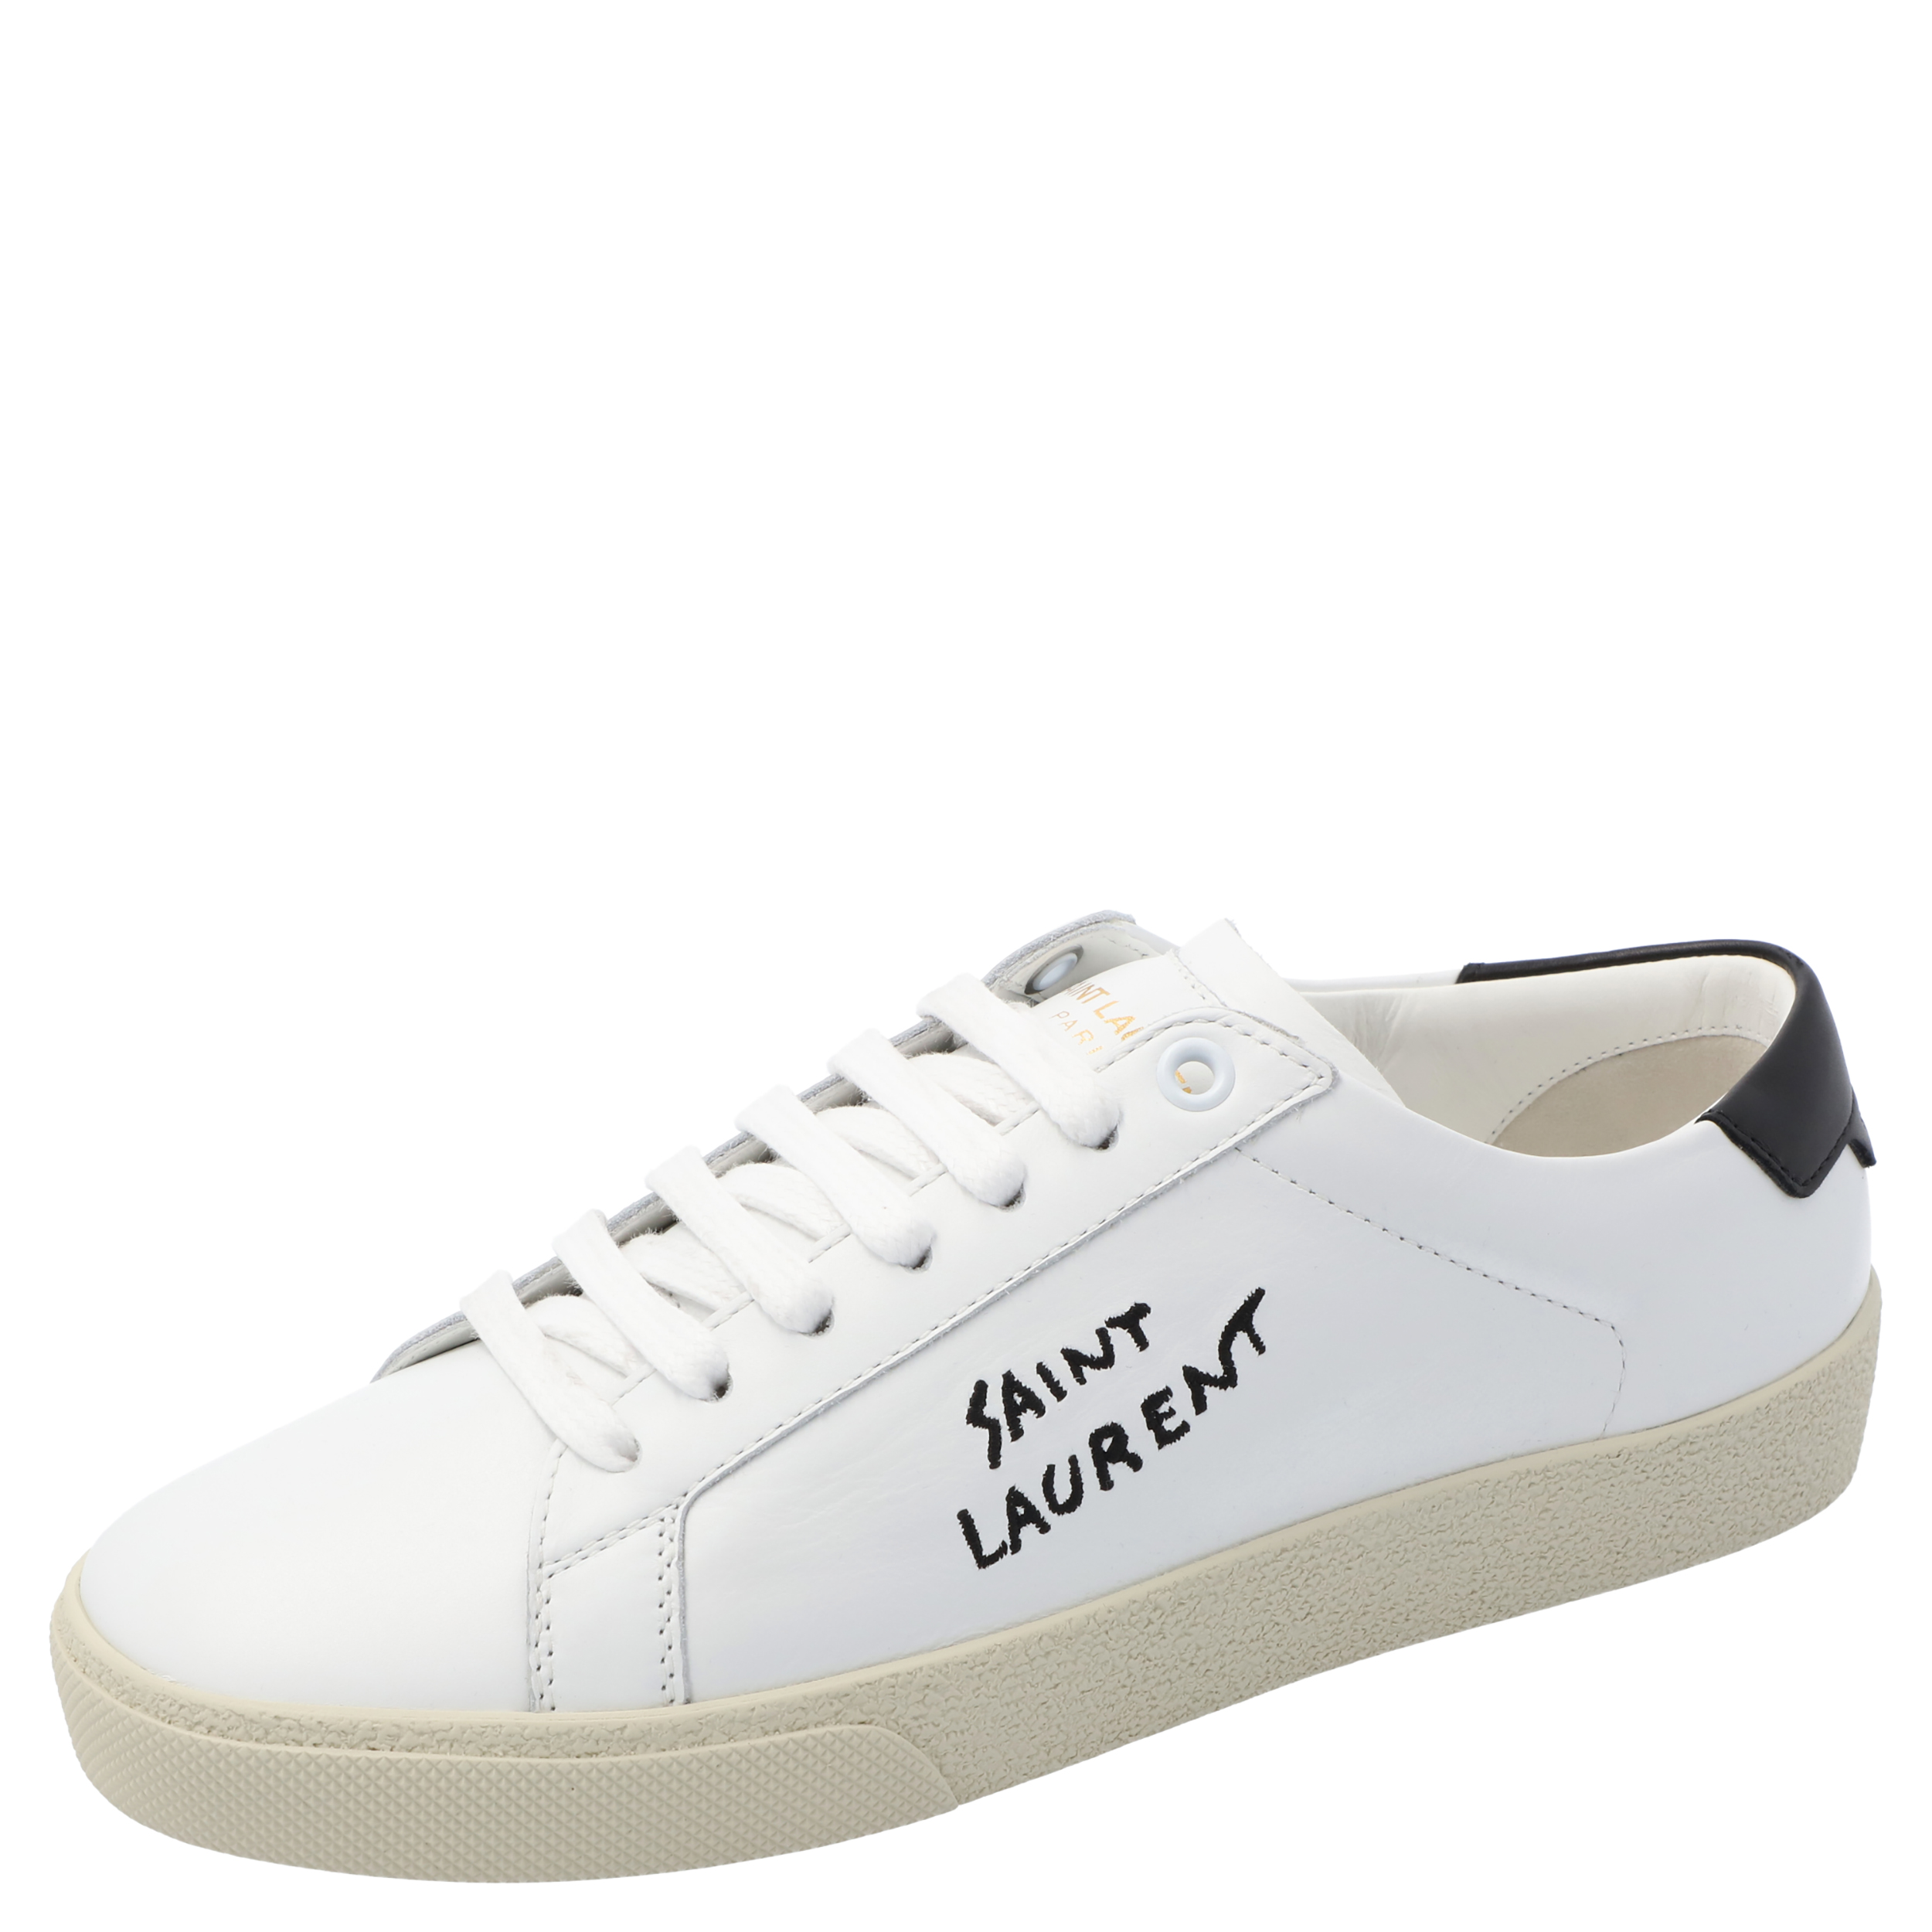 Pre-owned Saint Laurent White Leather Sl/06 Embroidered Court Classic Sneakers Size Eu 36